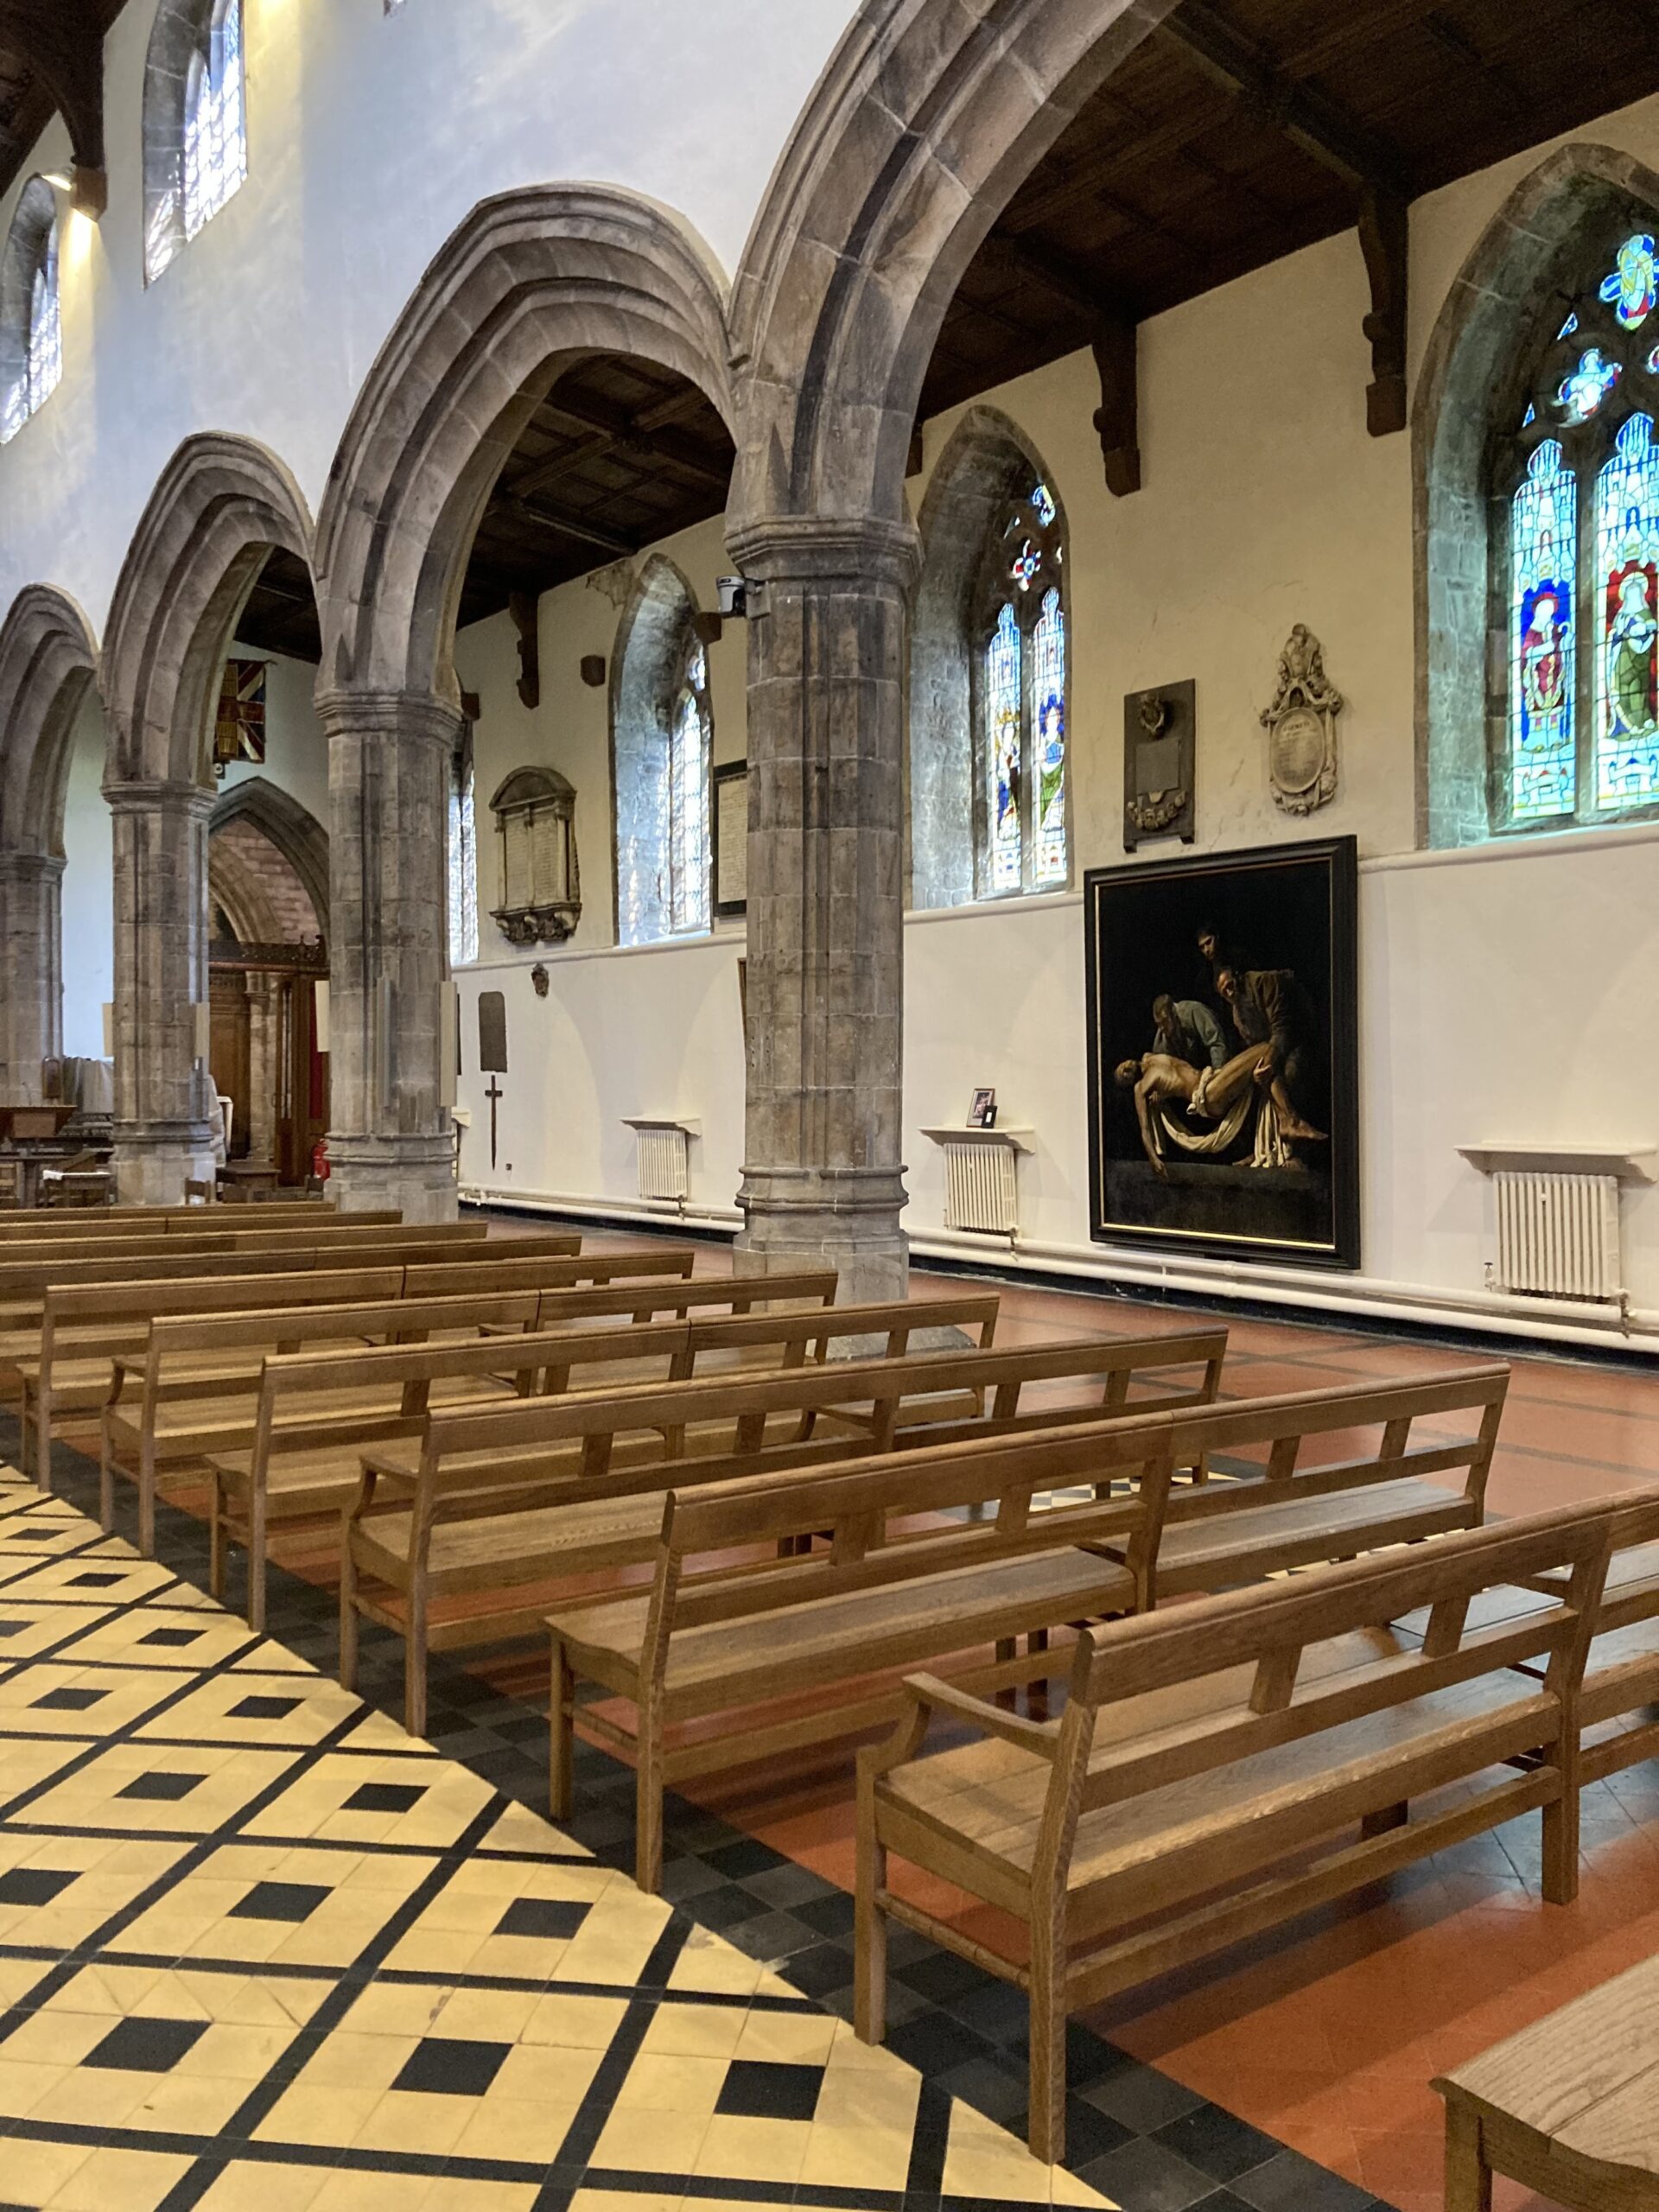 ‘Positive response’ as Bangor’s Cathedral pews replaced with modern furniture